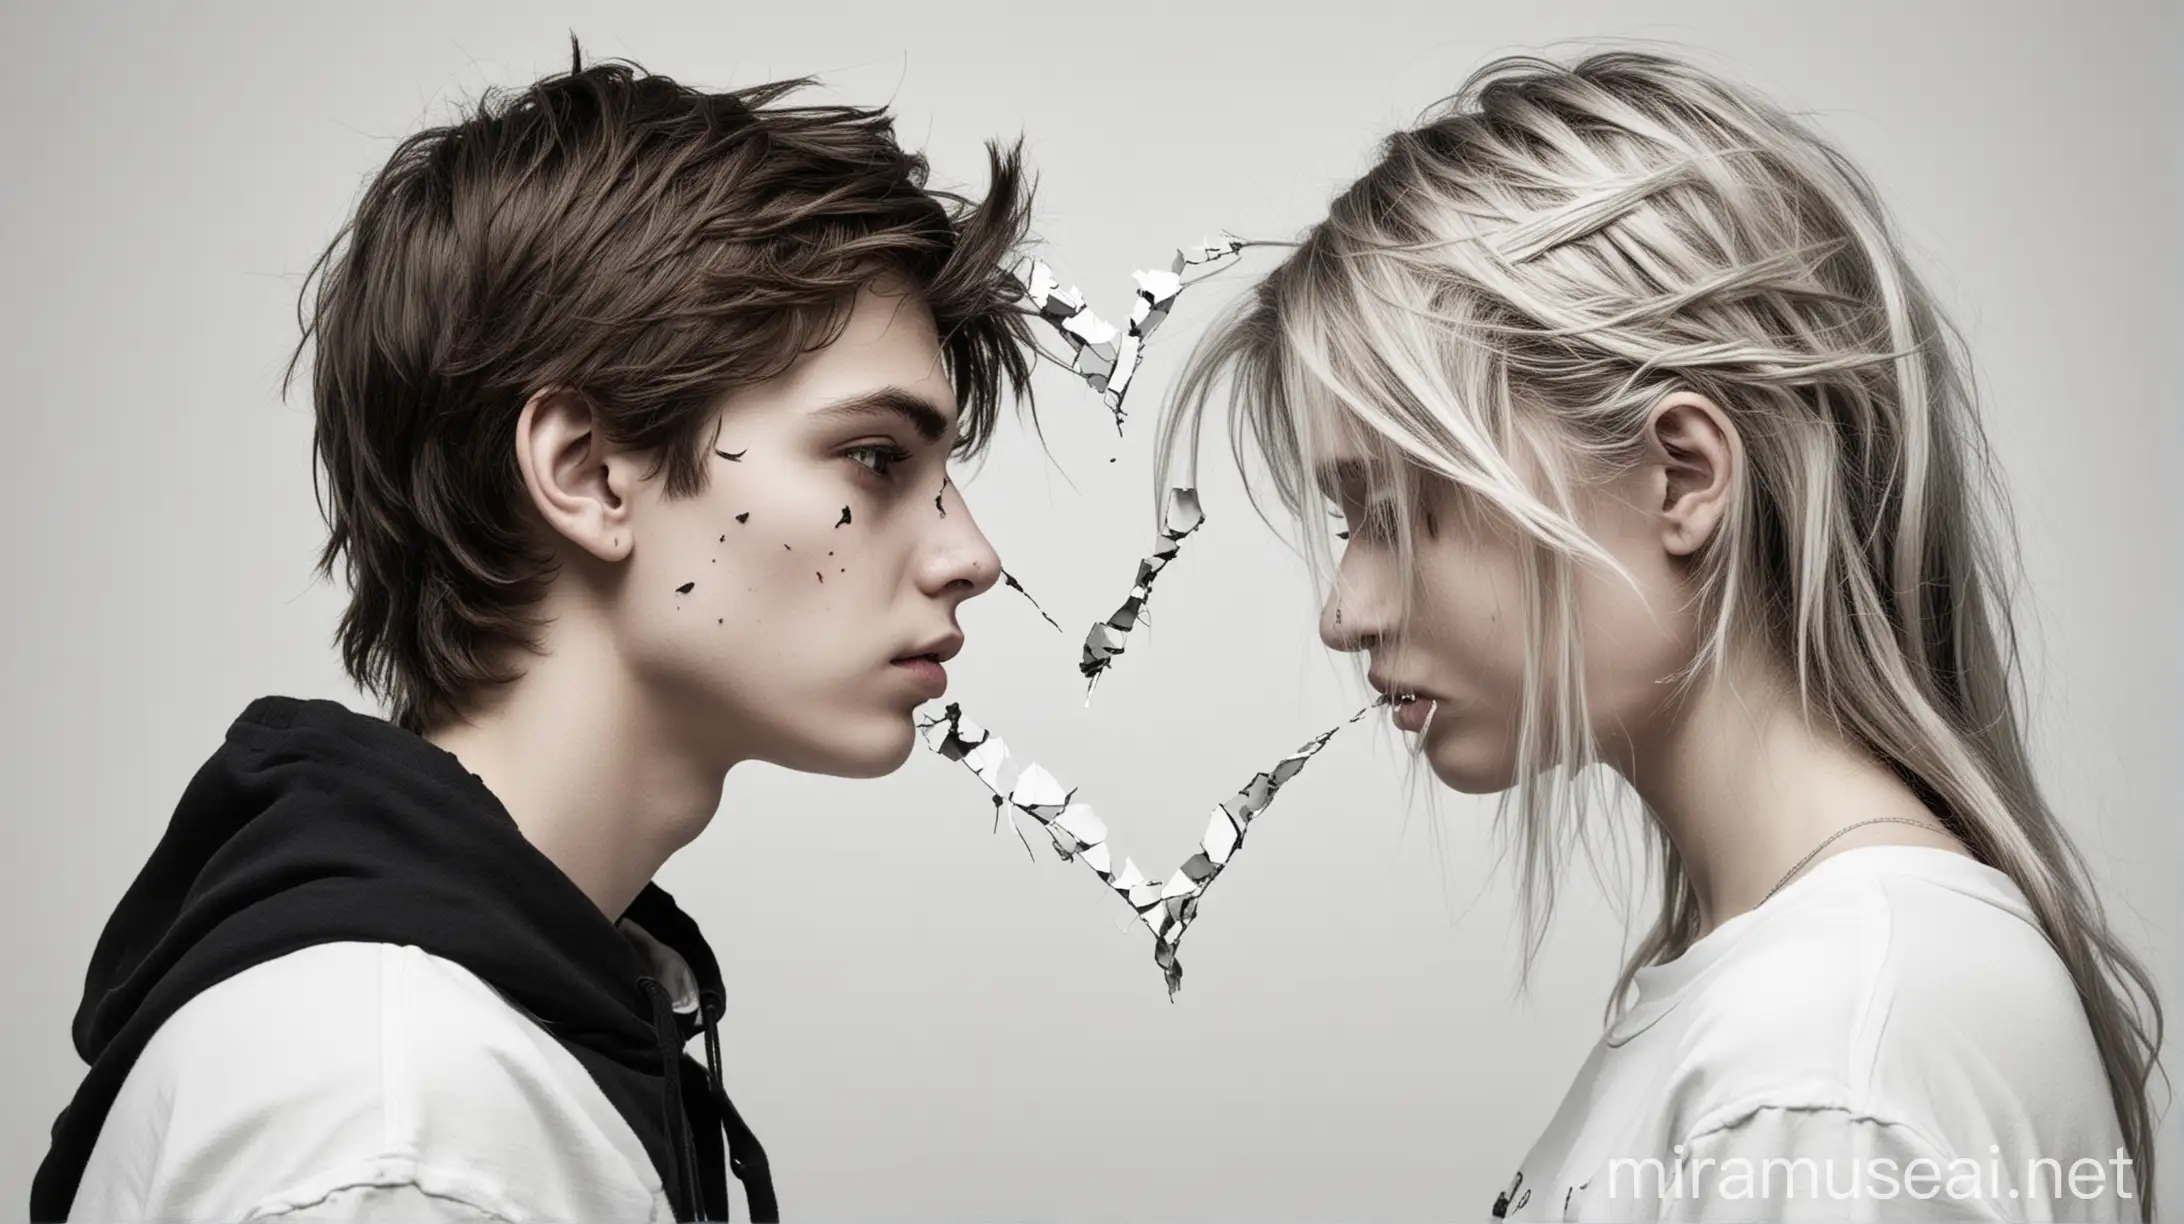 teenage boy and girl, broken love, white-black color, white color background